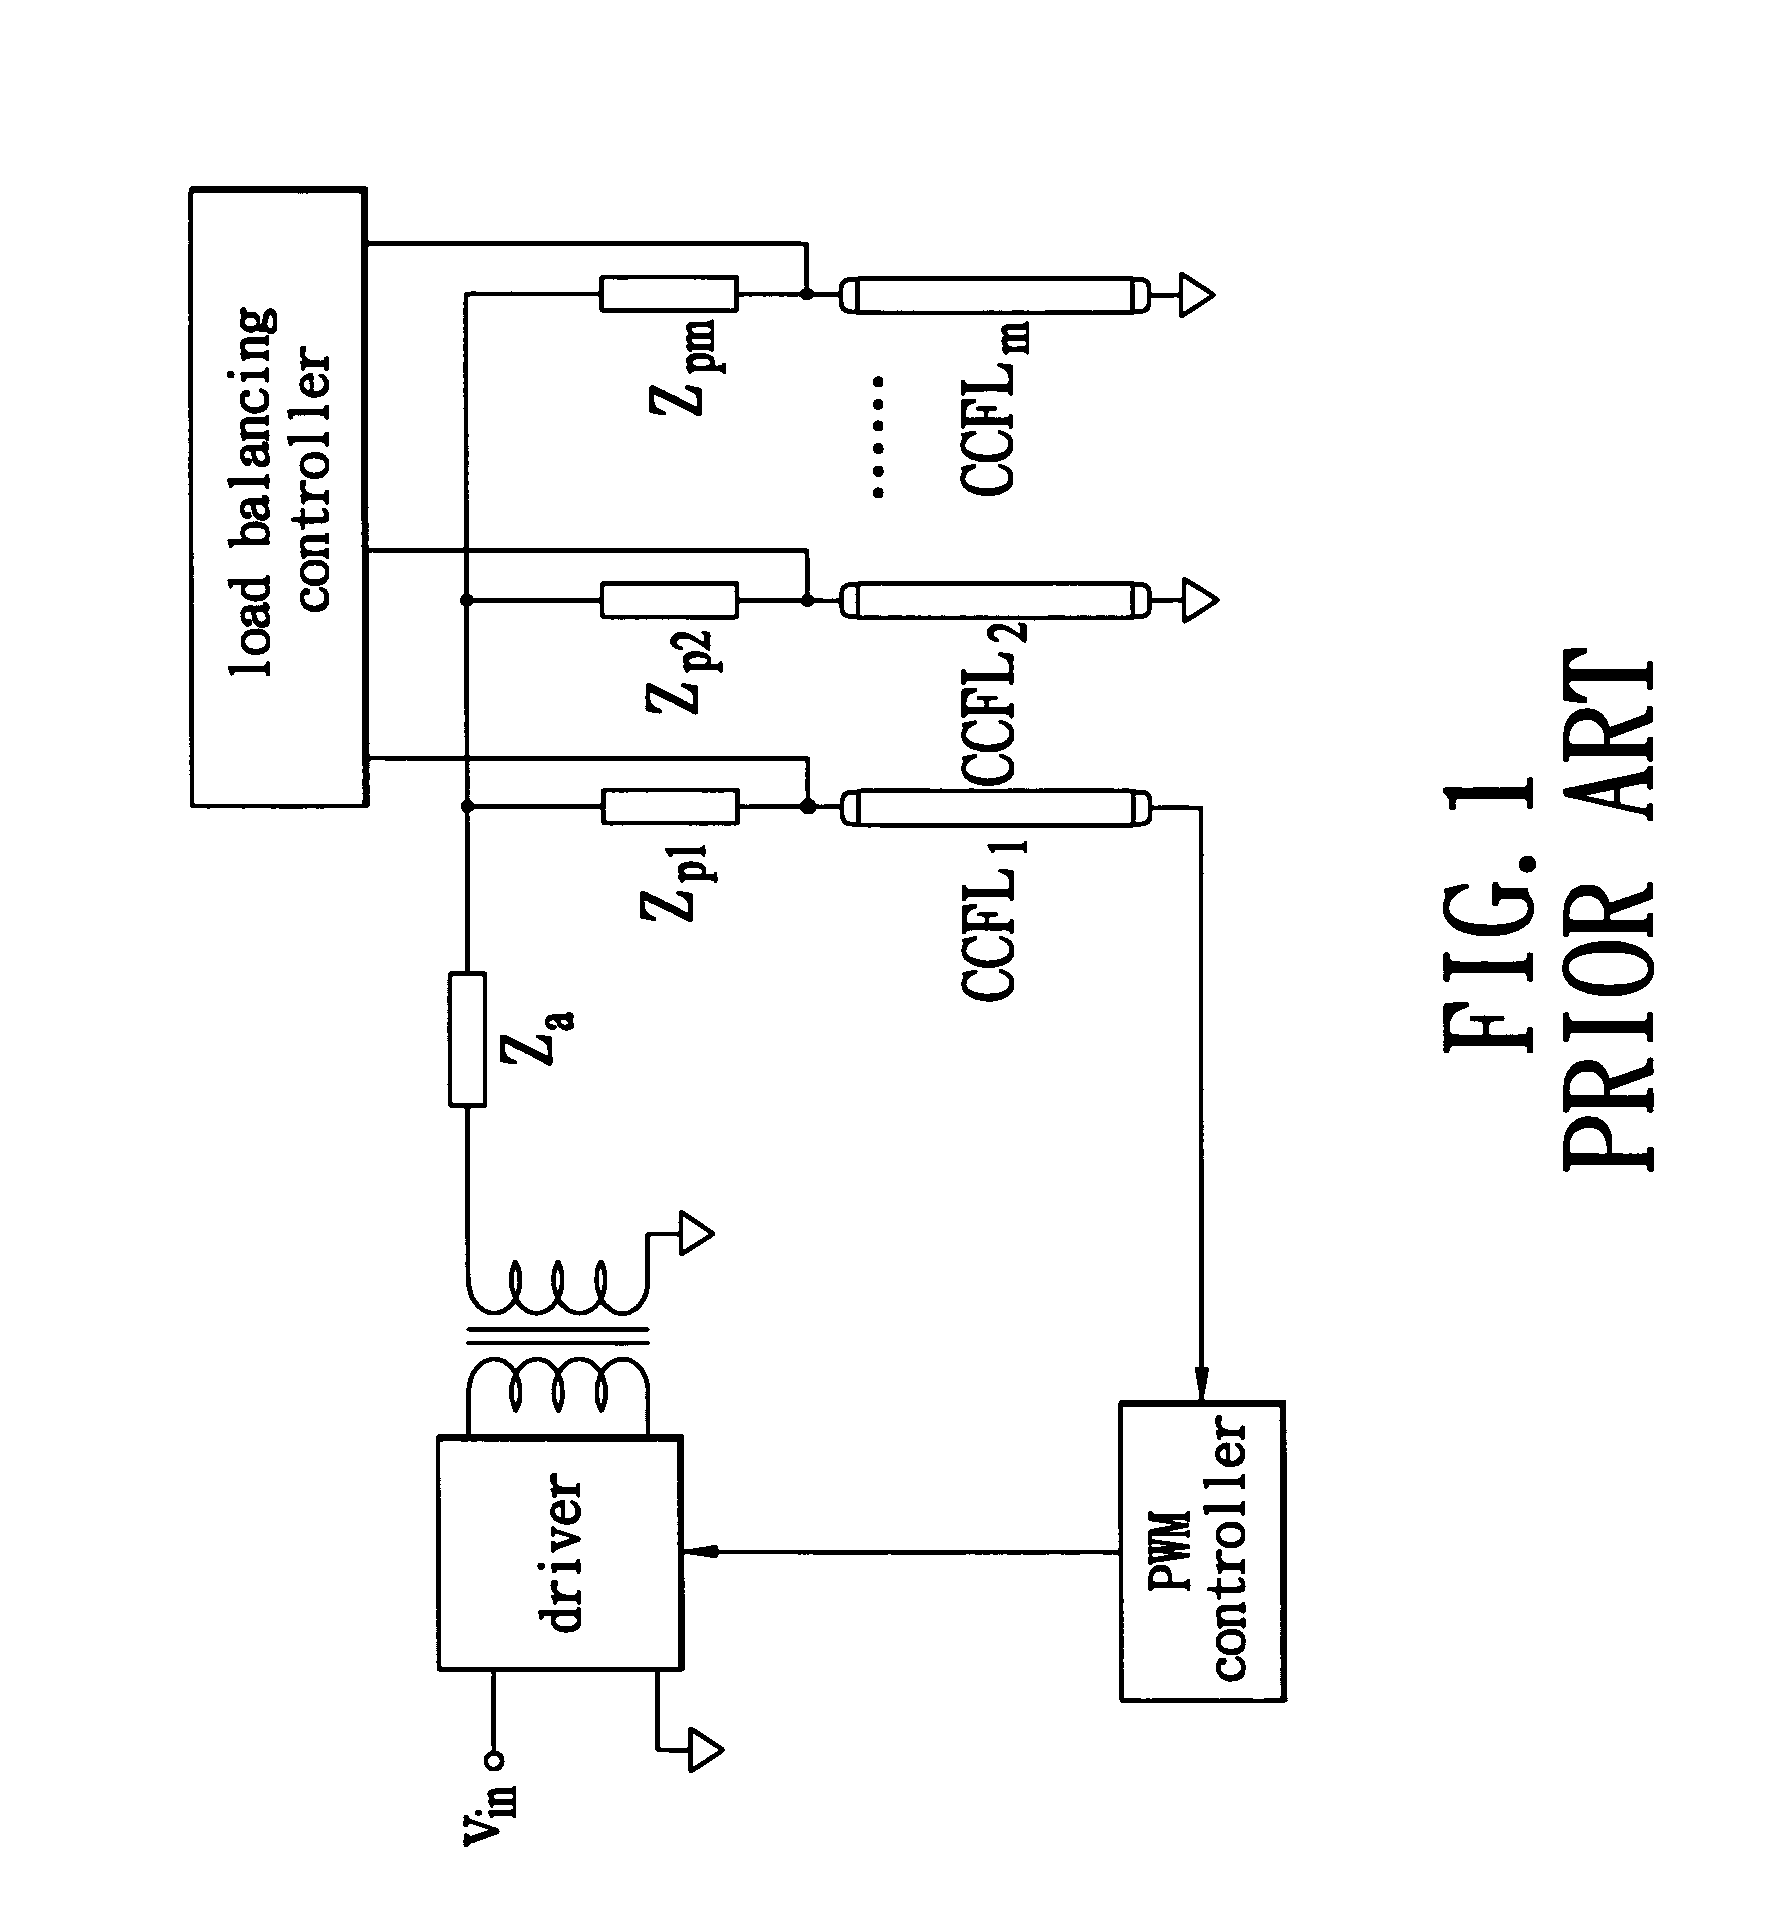 Multiple-CCFL parallel driving circuit and the associated current balancing control method for liquid crystal display